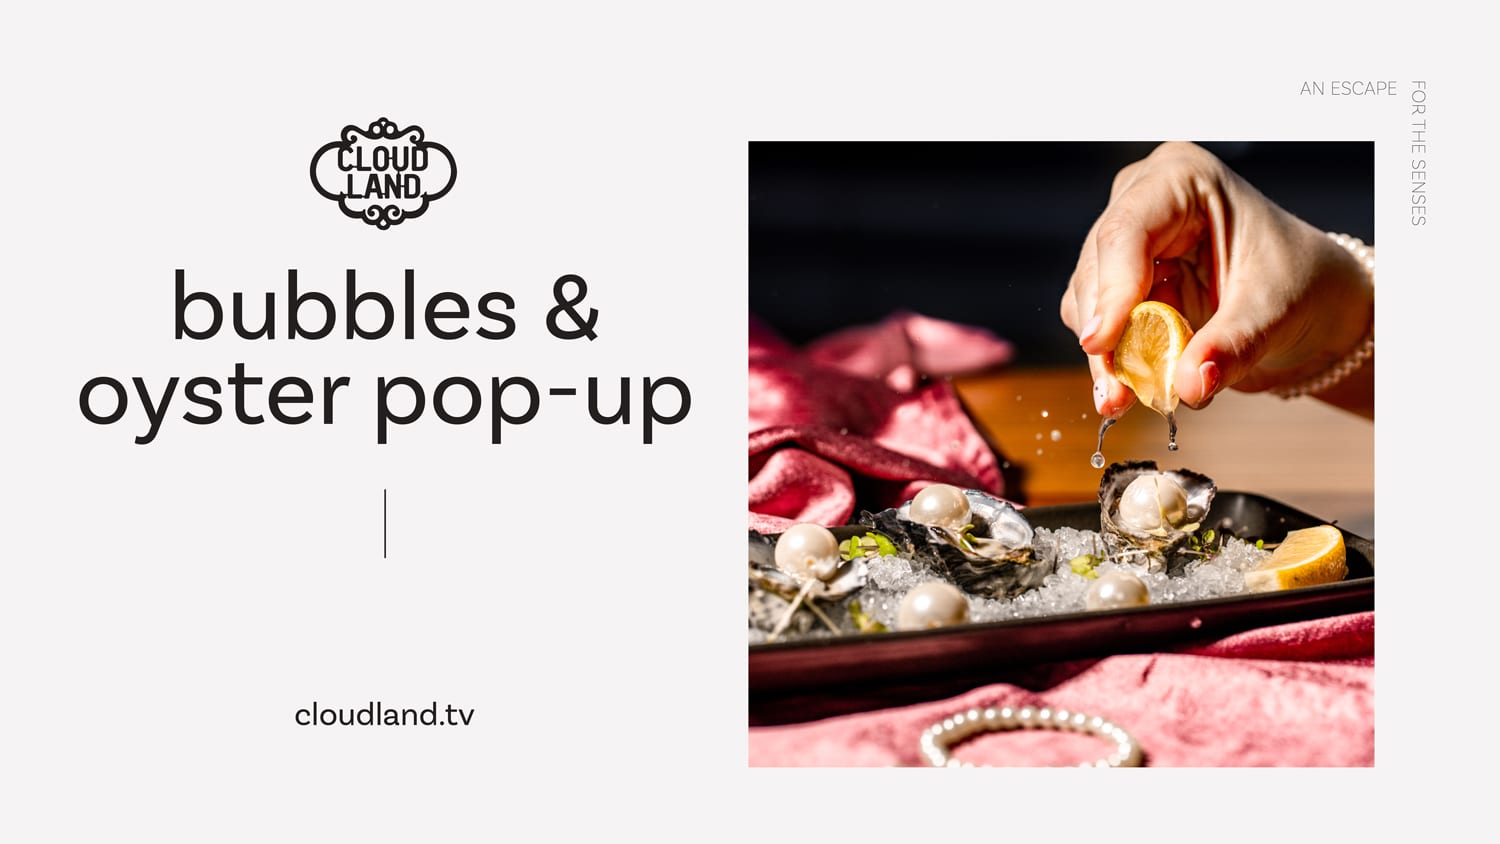 Cloudland Bubbles and Oyster Pop Up